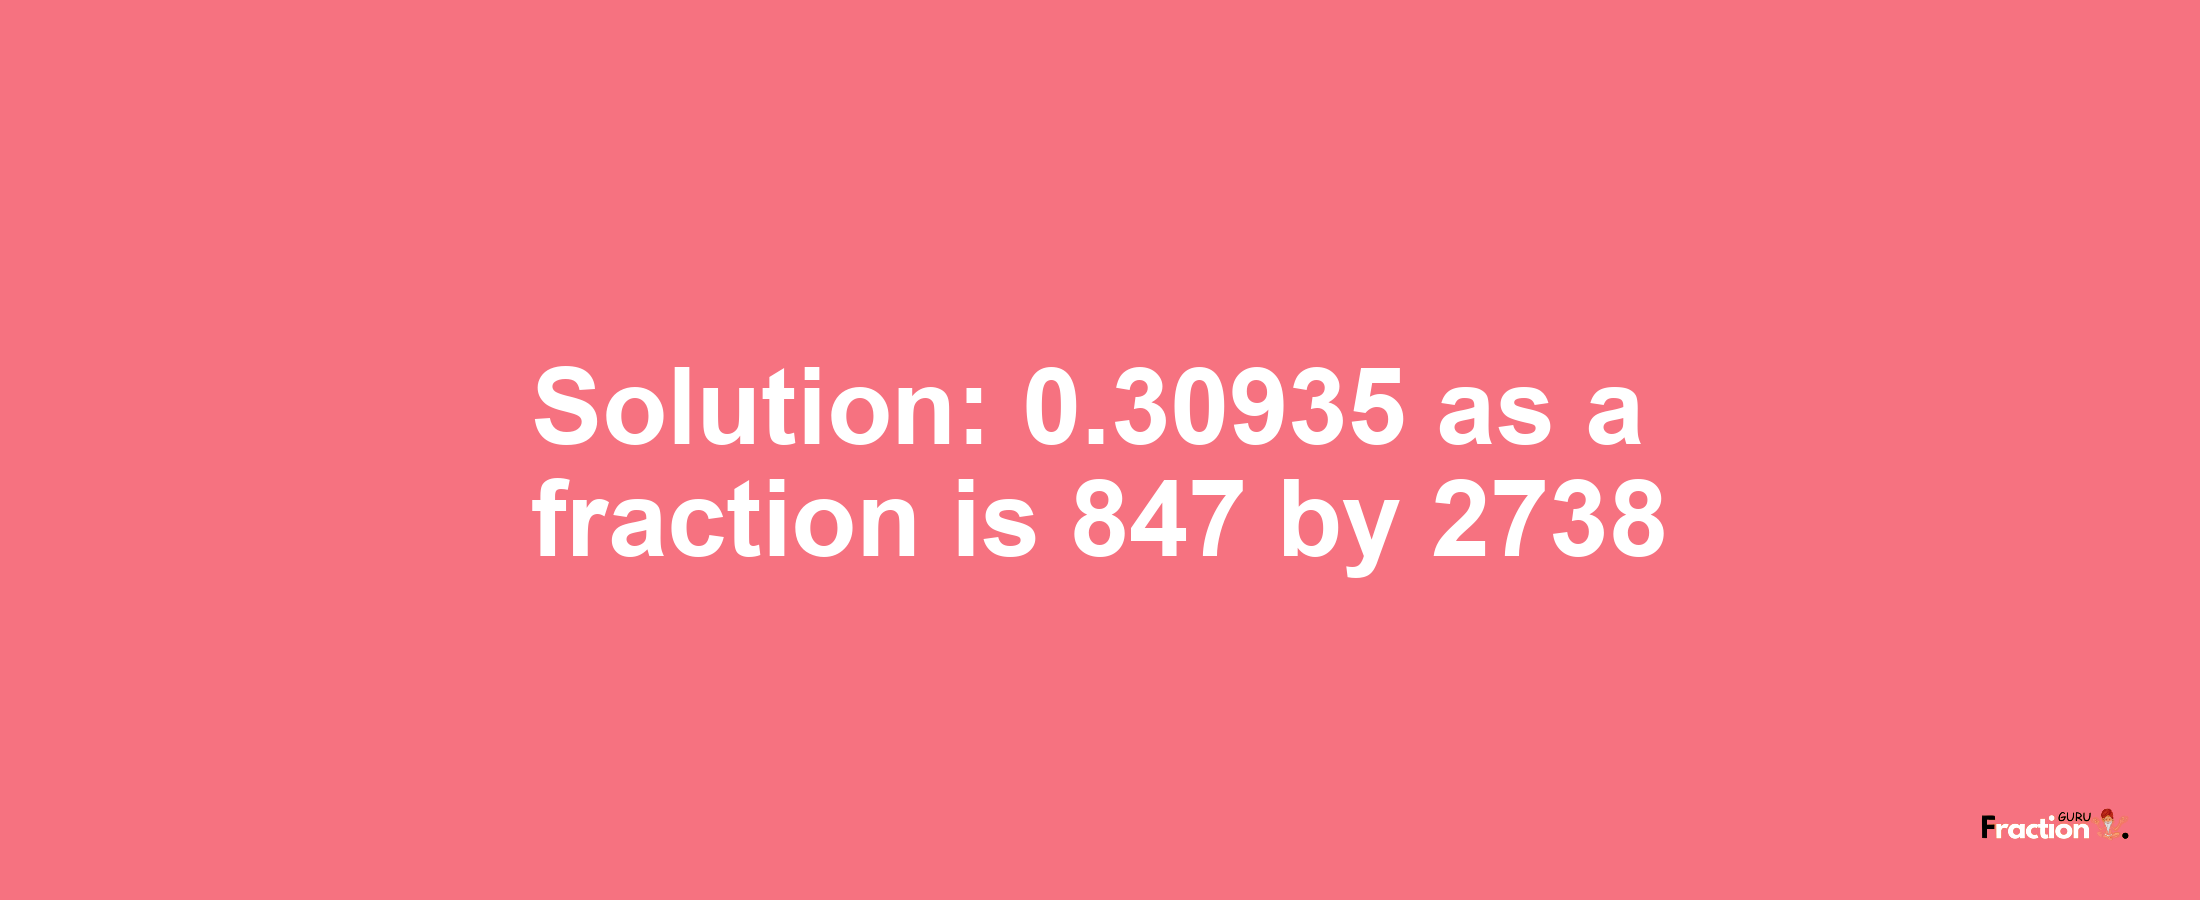 Solution:0.30935 as a fraction is 847/2738